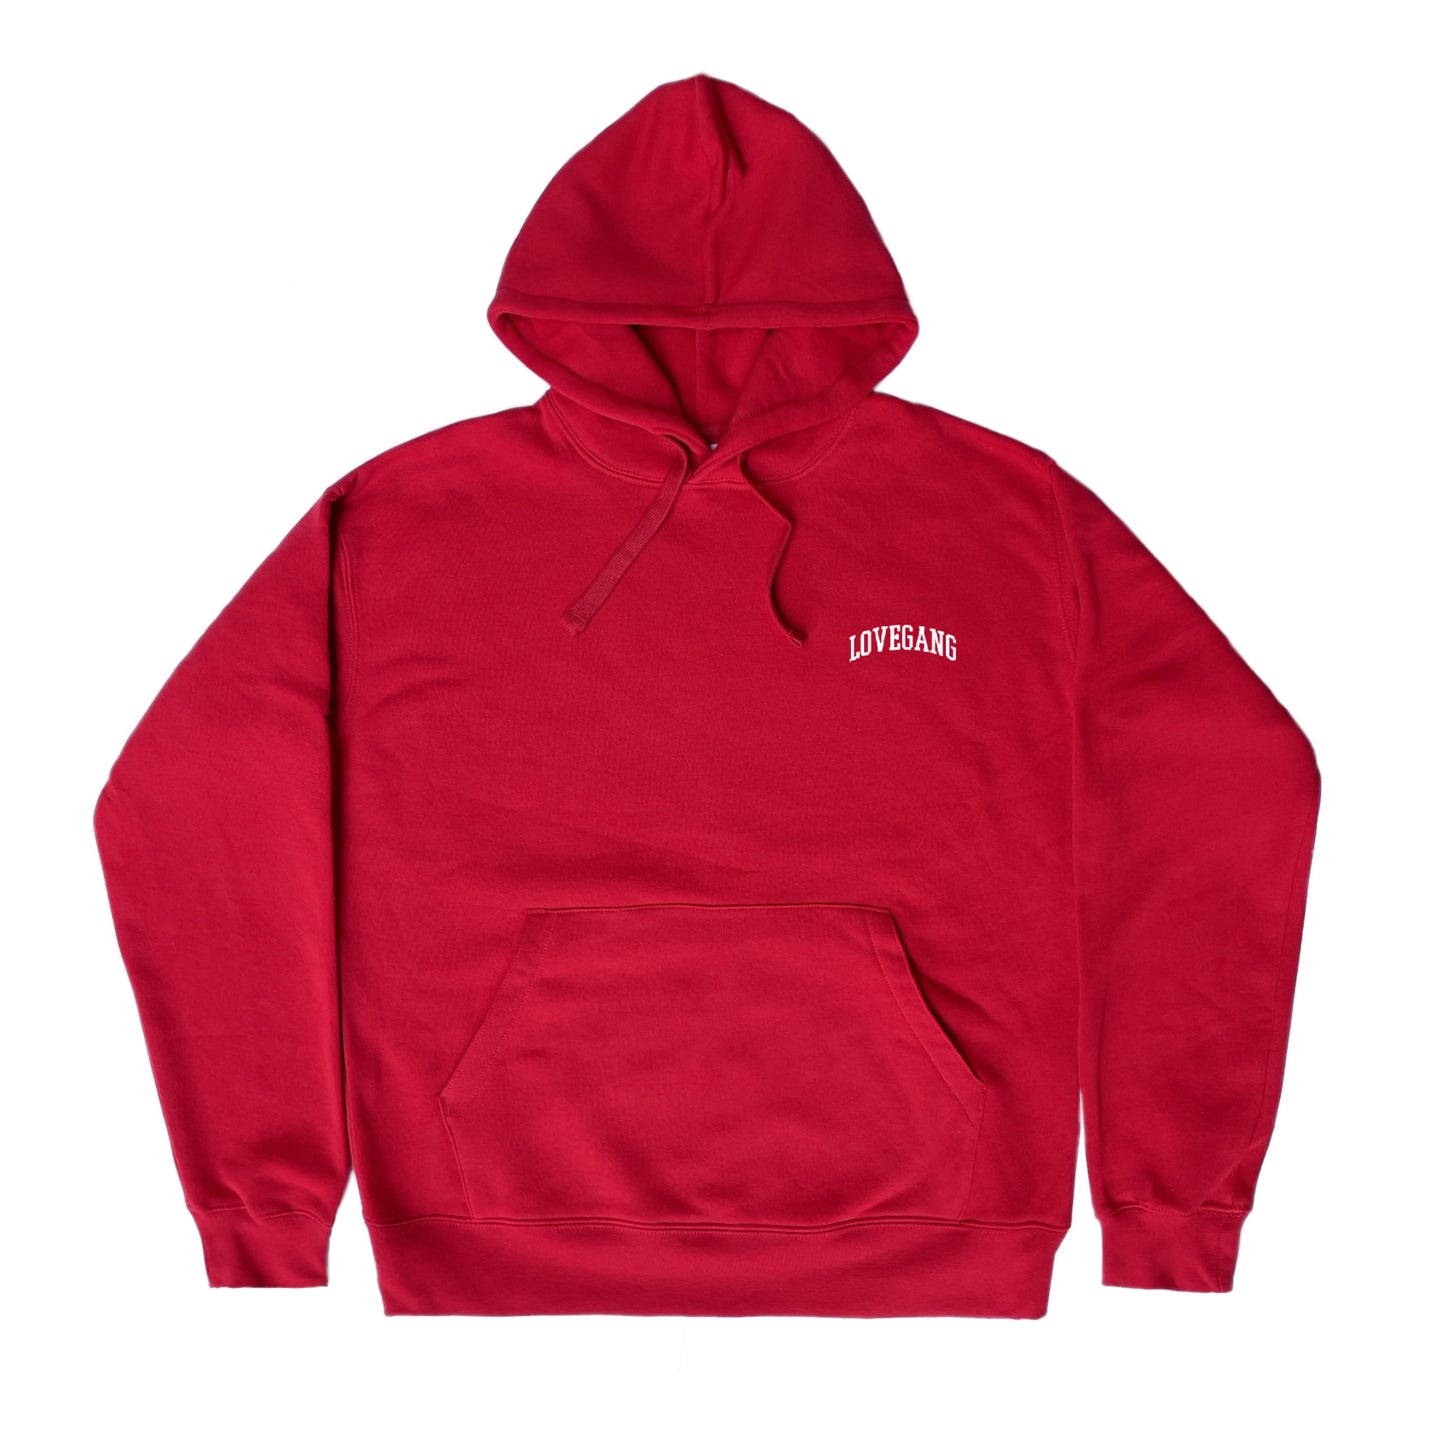 COLLEGE S/S '22 - HOODIE (RD)